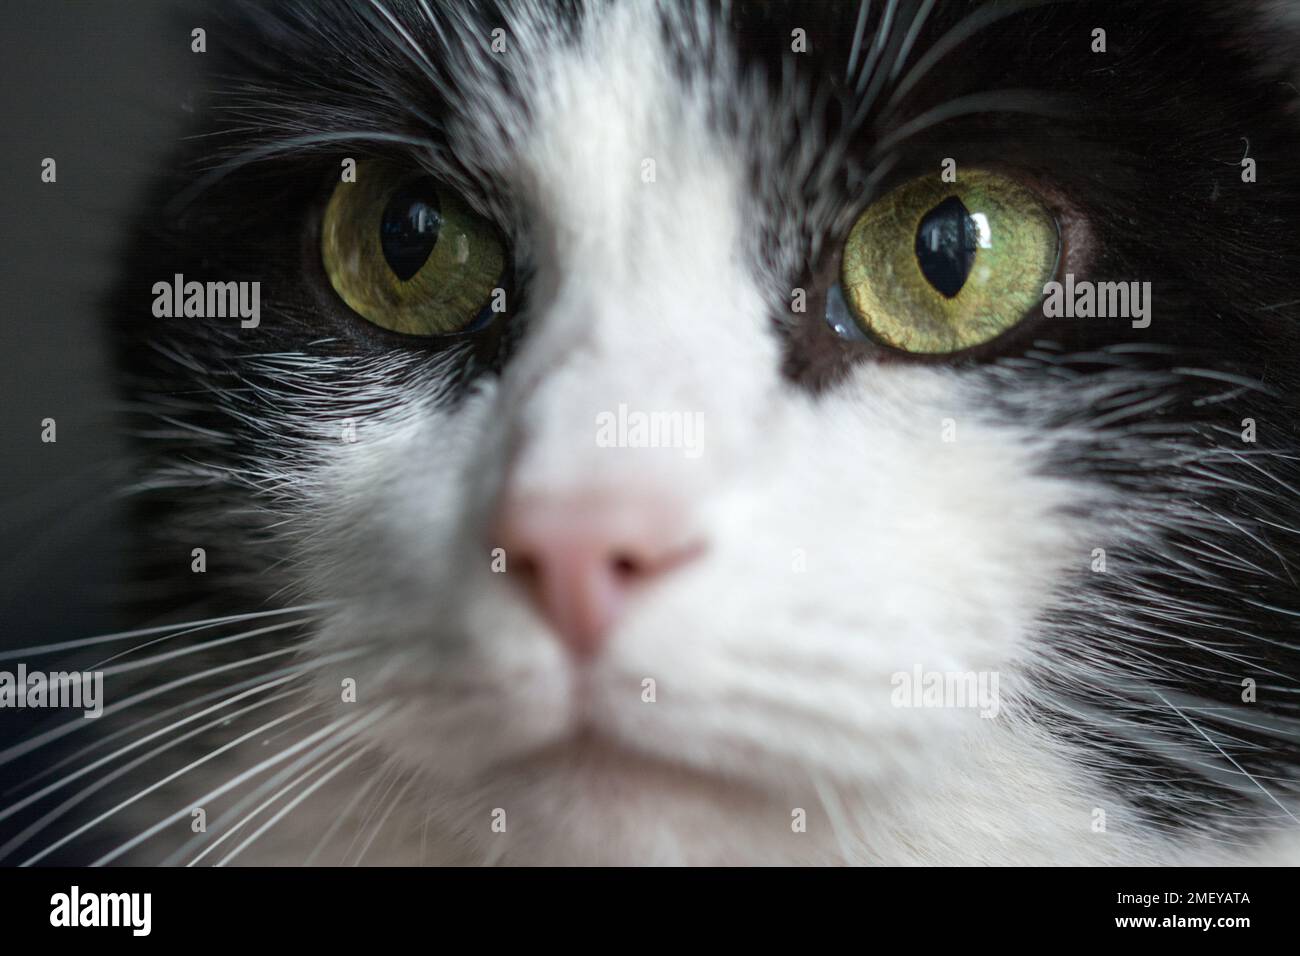 Closeup of black and white cat's face - green eyes Stock Photo